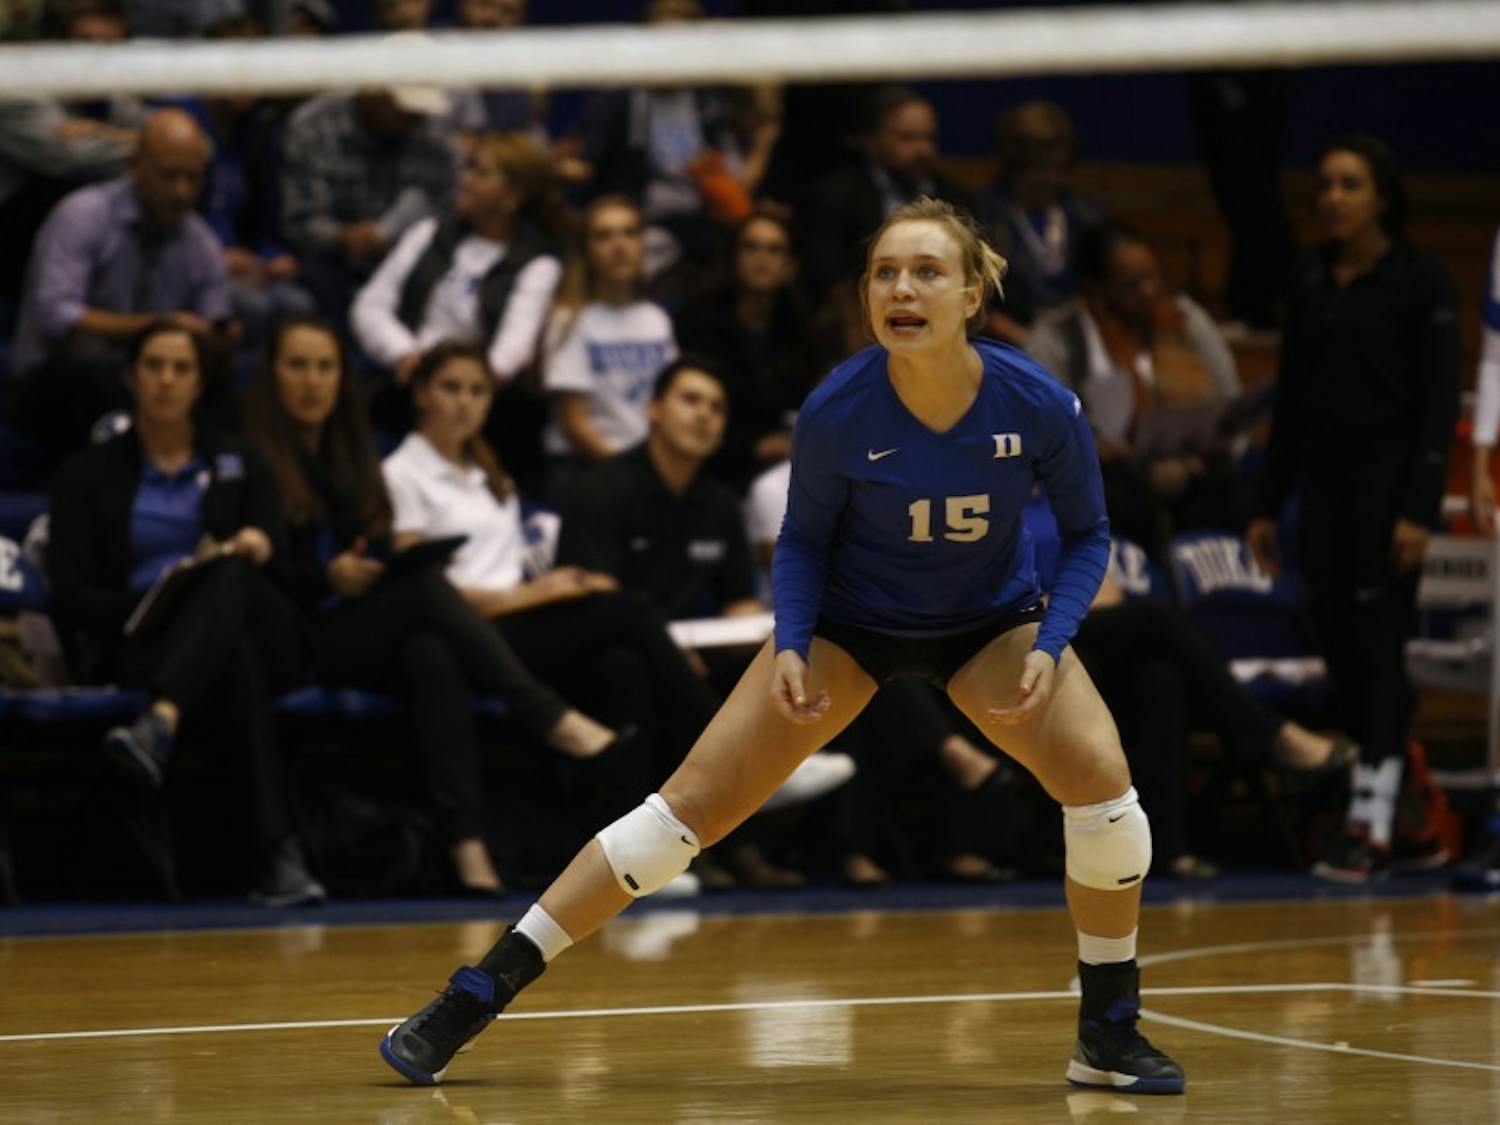 Junior libero Sasha Karelov and the Blue Devils will play their first home contests of the year this weekend.